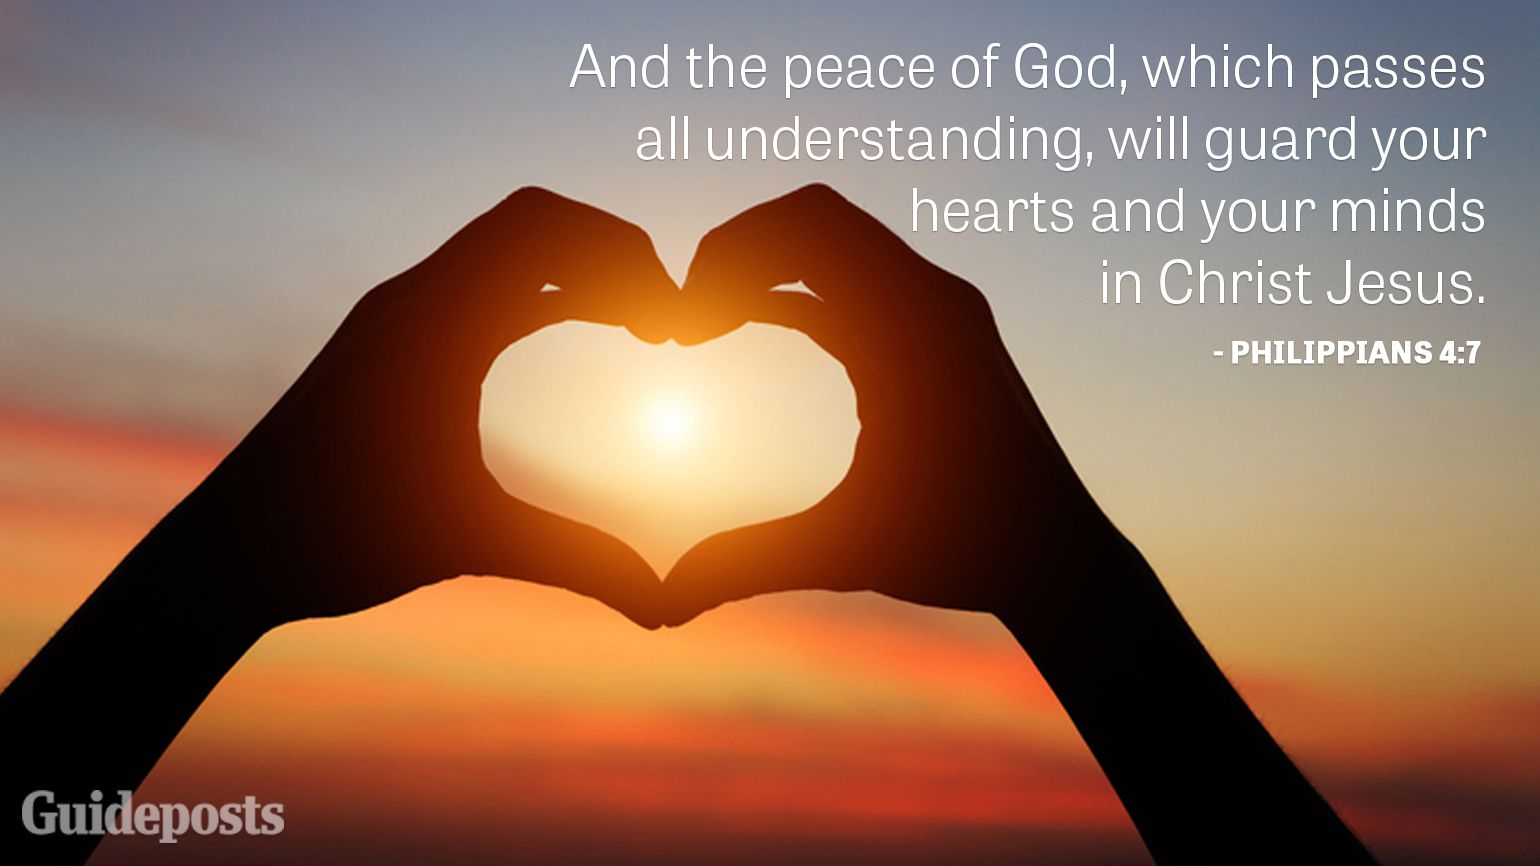 And the peace of God, which passes all understanding, will guard your hearts and your minds in Christ Jesus.